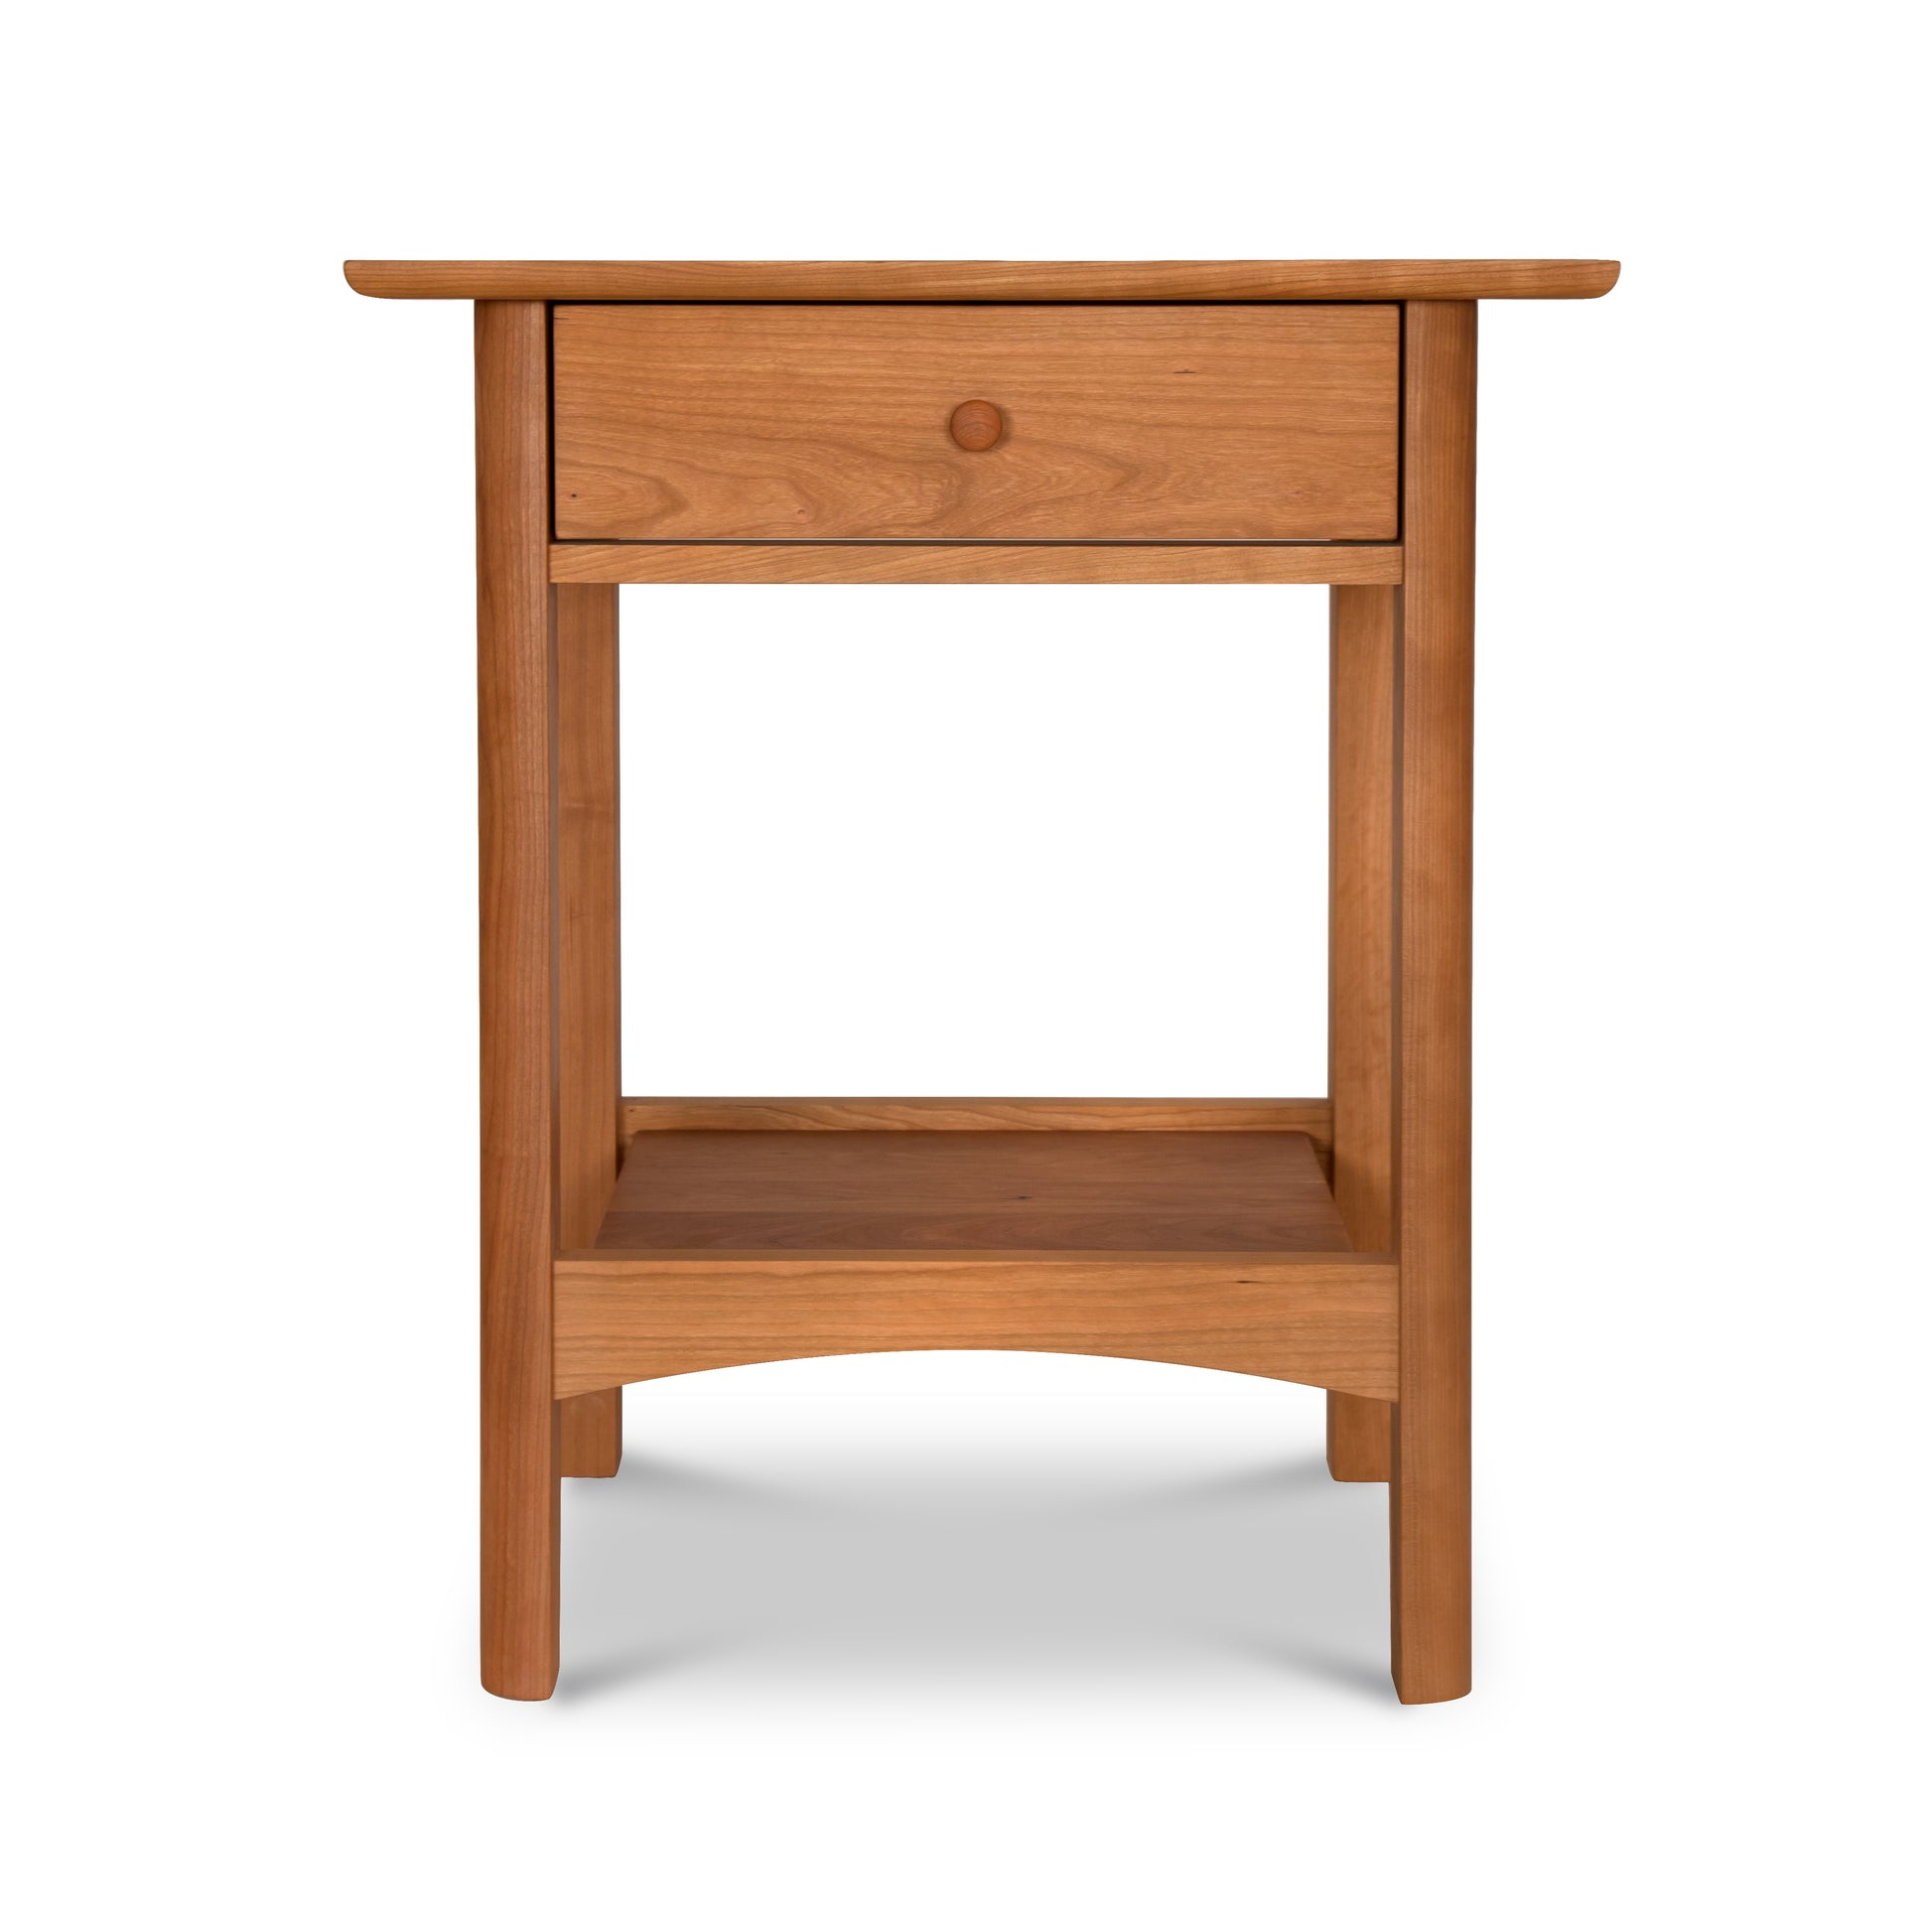 Heartwood Shaker 1-Drawer Open Shelf Nightstand by Vermont Furniture Designs, isolated on a white background.